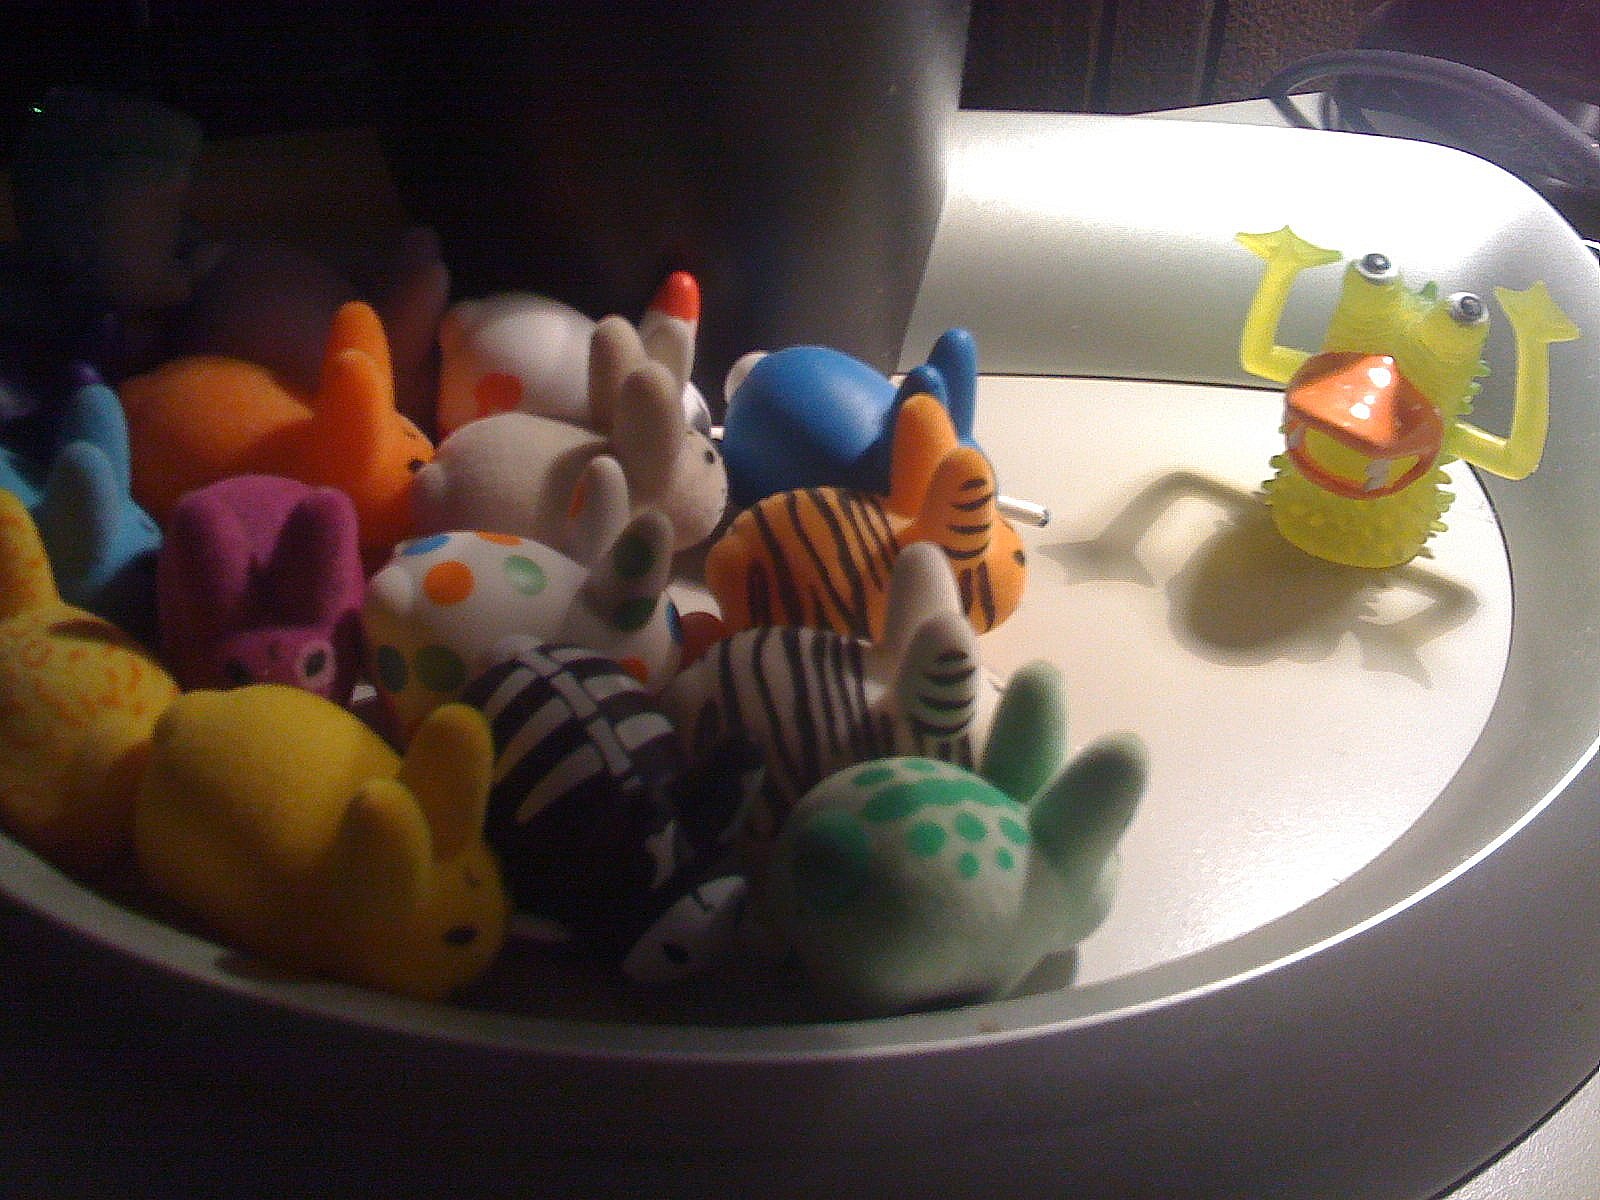 there are many small colorful stuffed animals in the sink